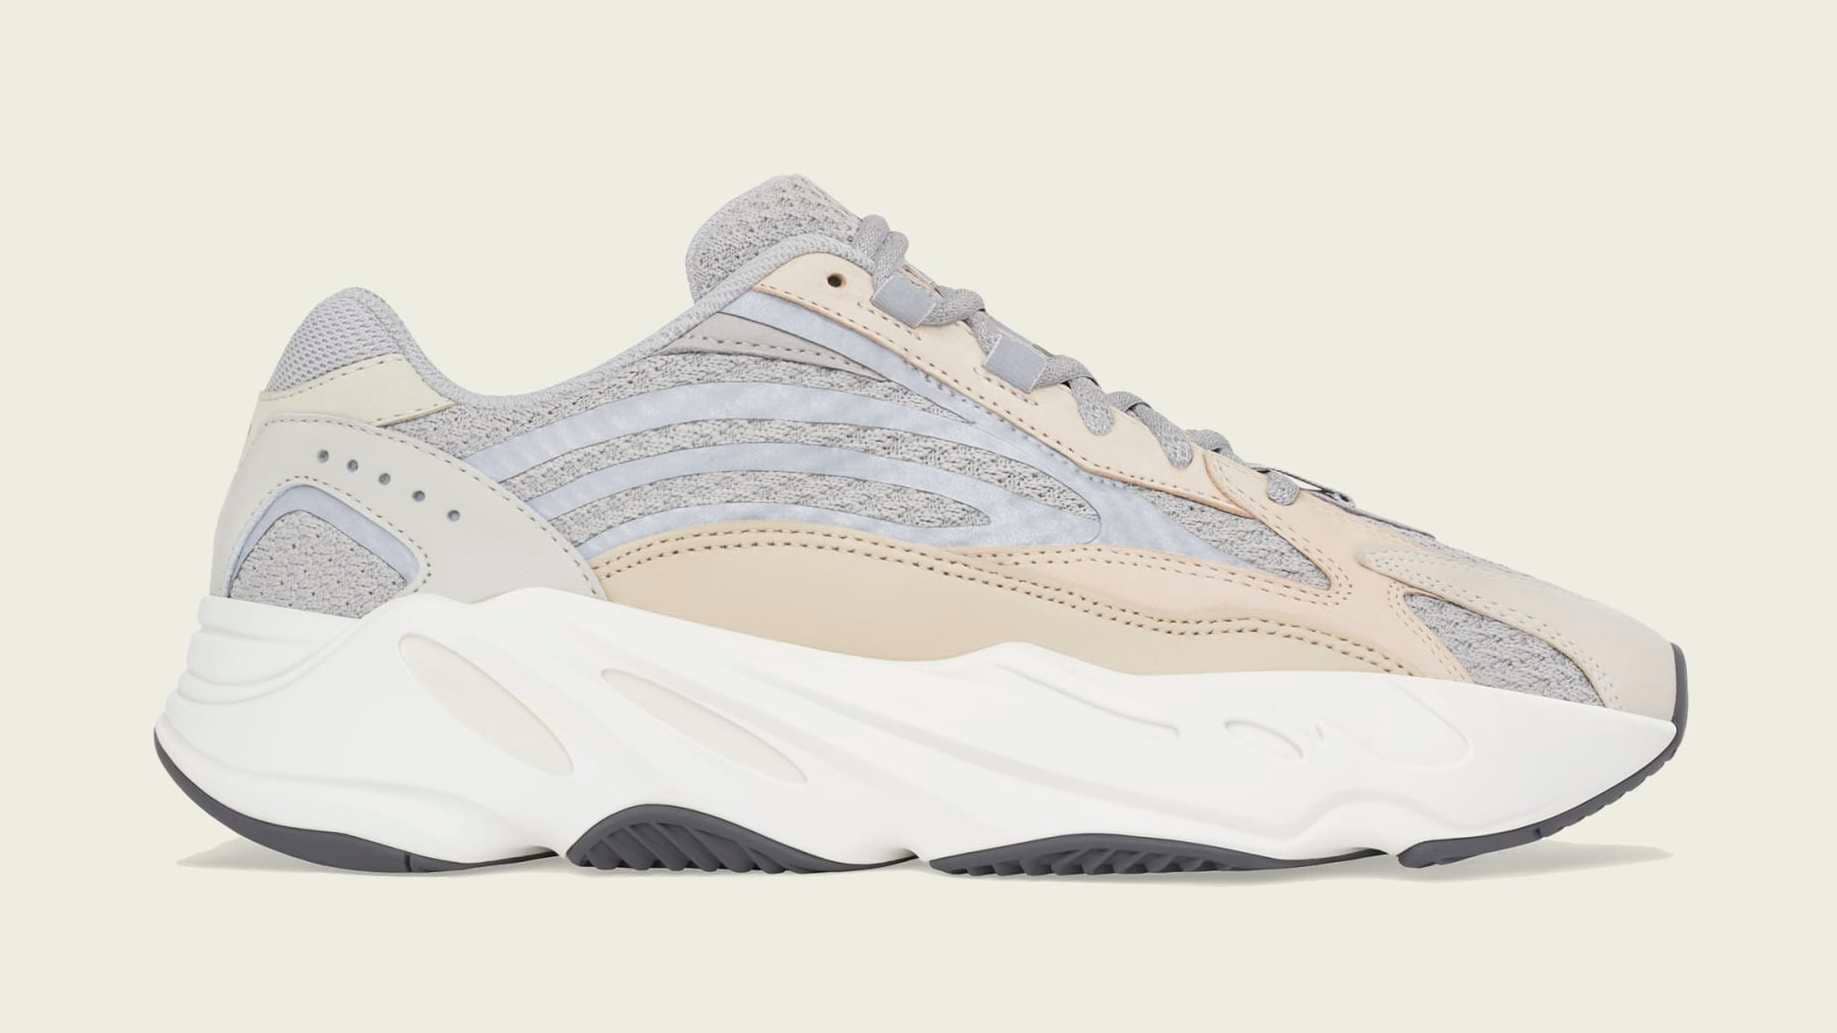 Adidas Yeezy Boost 700 V2 'Cream' GY7924 Lateral